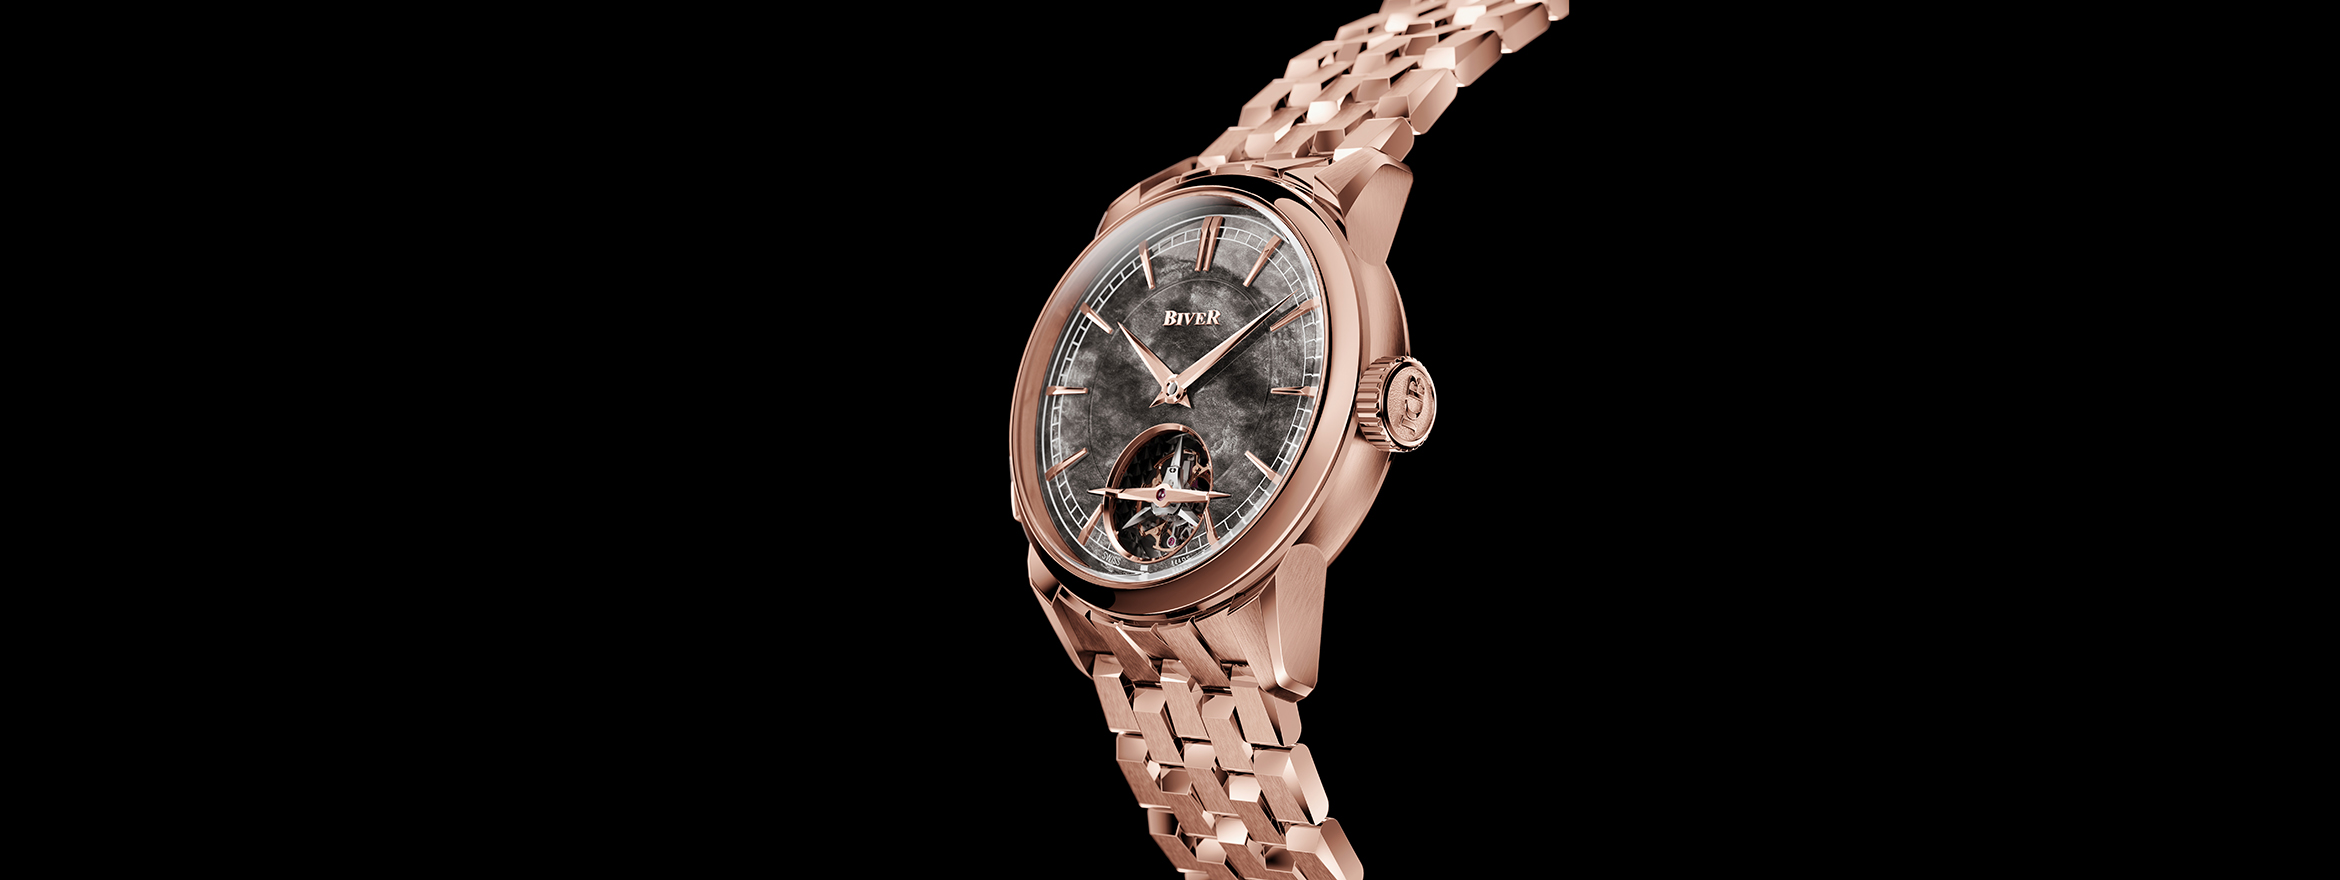 Jean-Claude Biver Launches His Eponymous New Watch Brand, Biver Watches